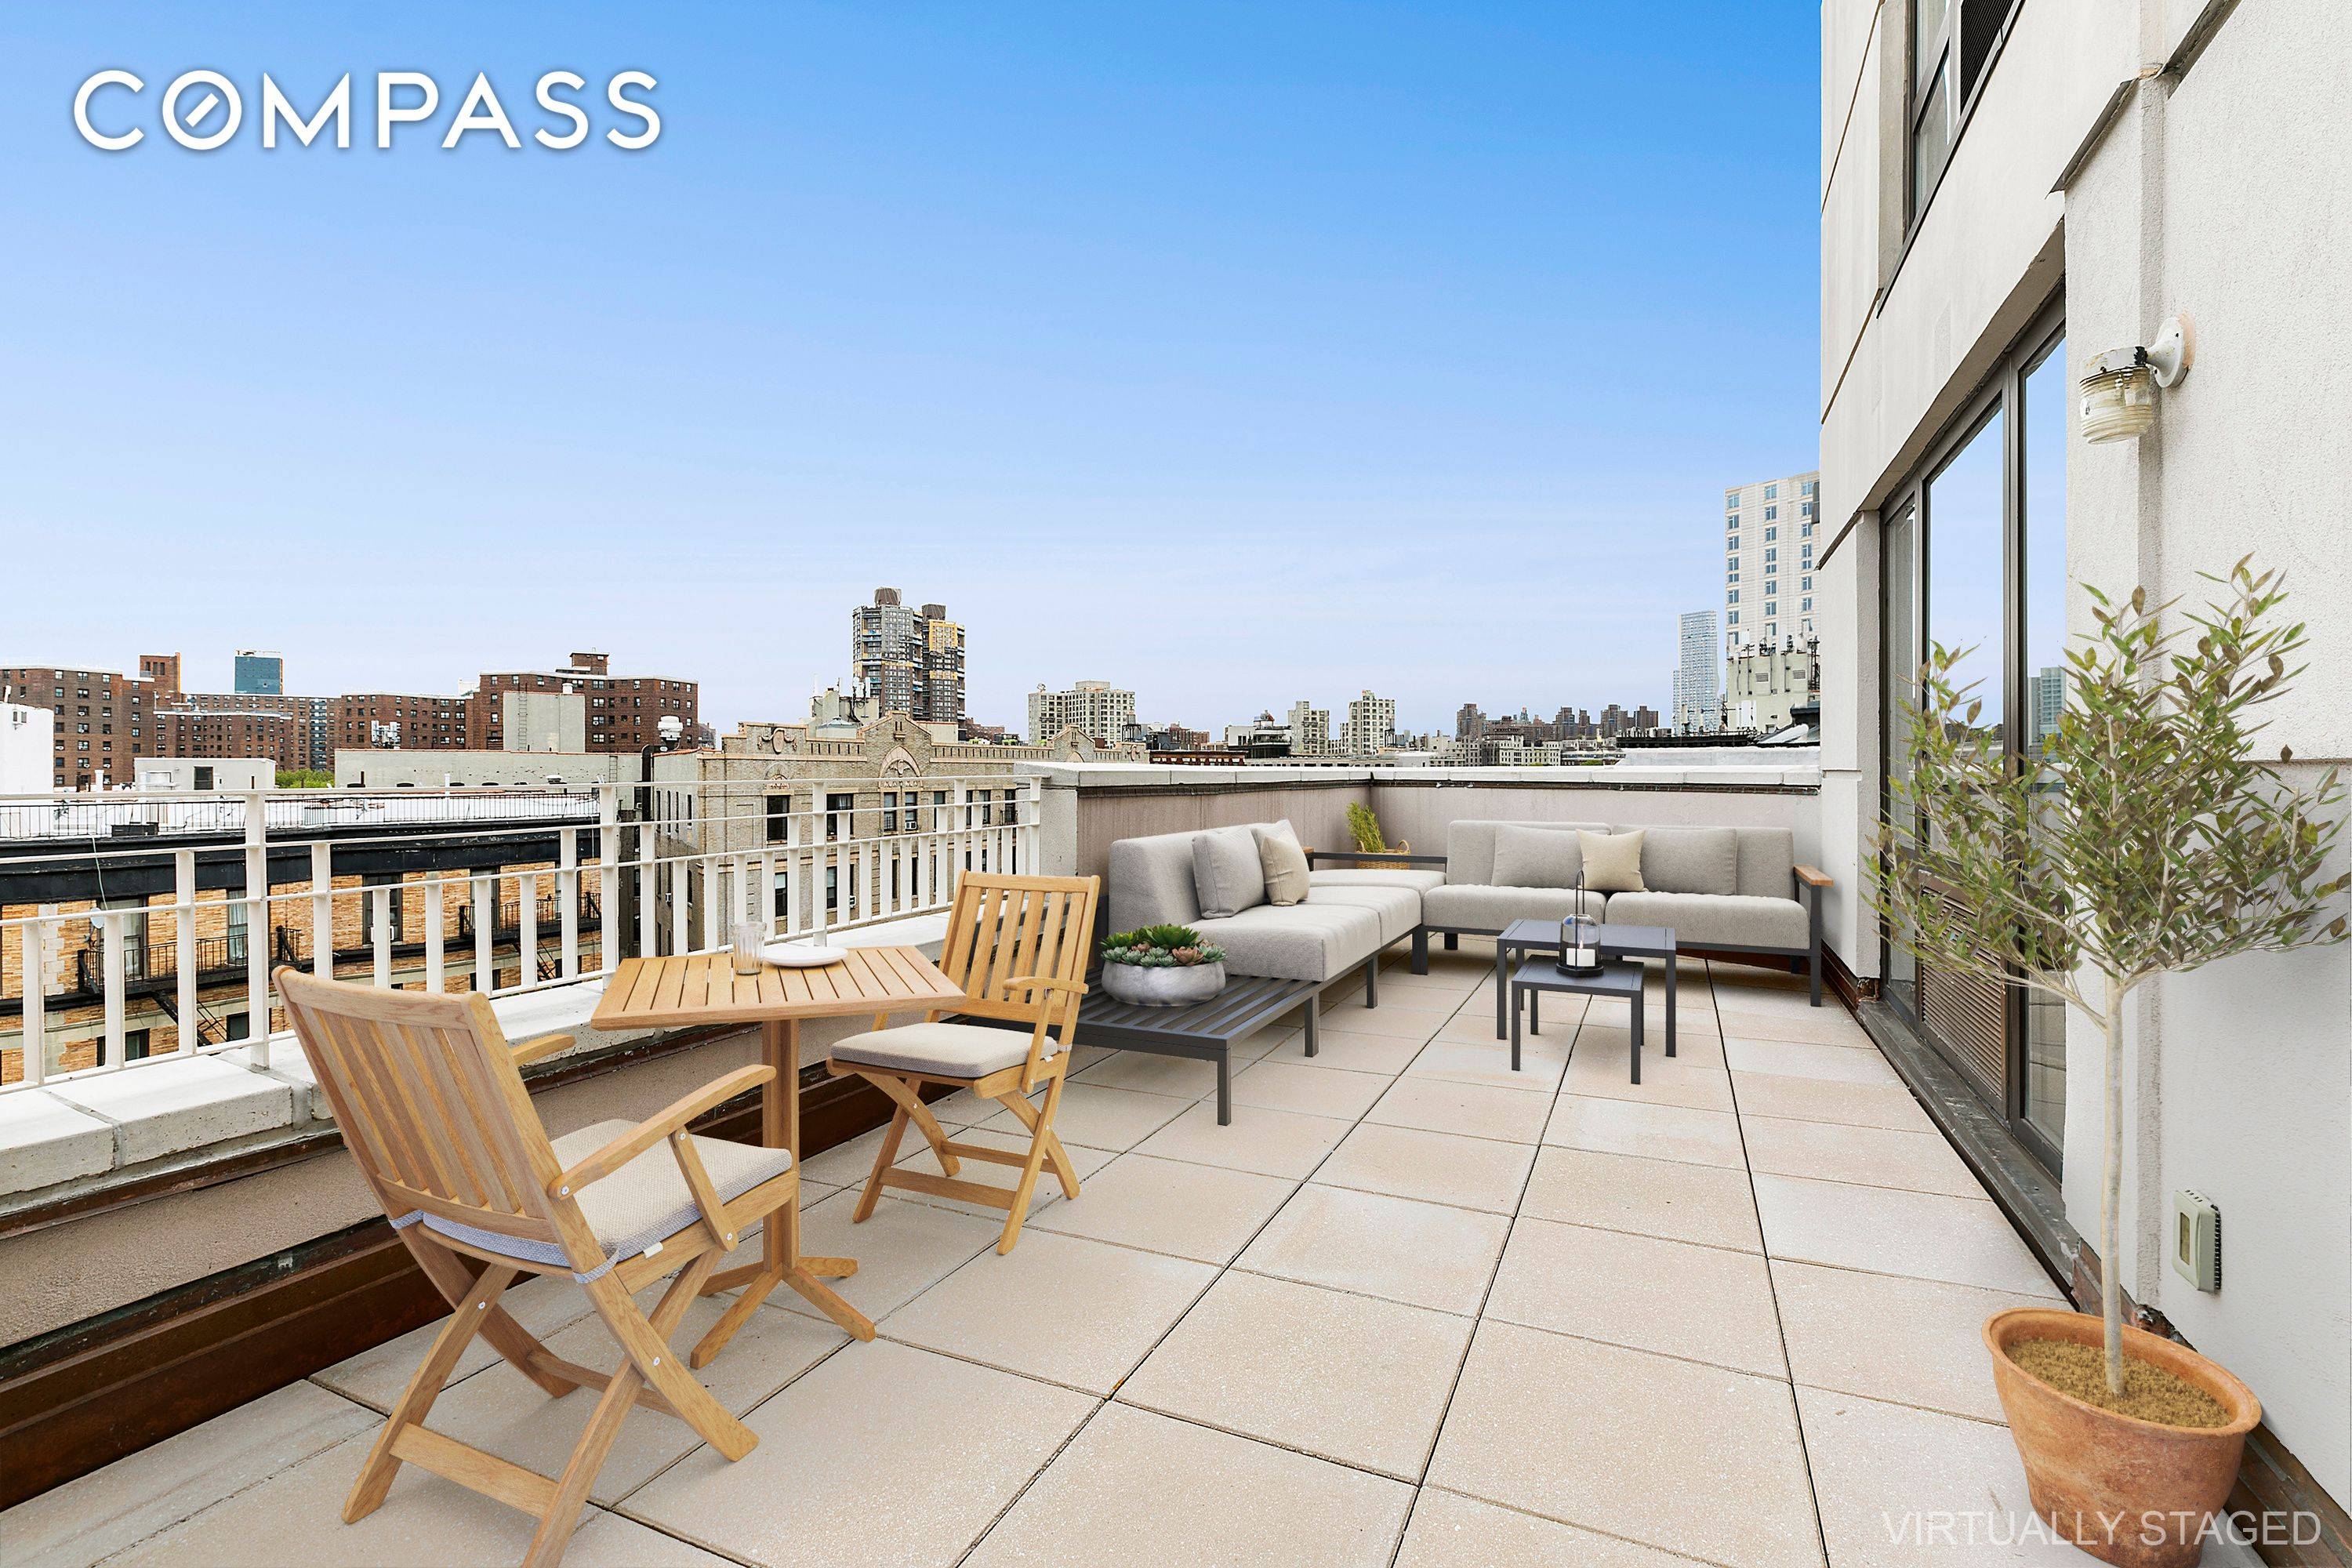 Unit 6A is a rare opportunity to rent a 2, 190 SF contemporary loft style 3 bedroom 2.